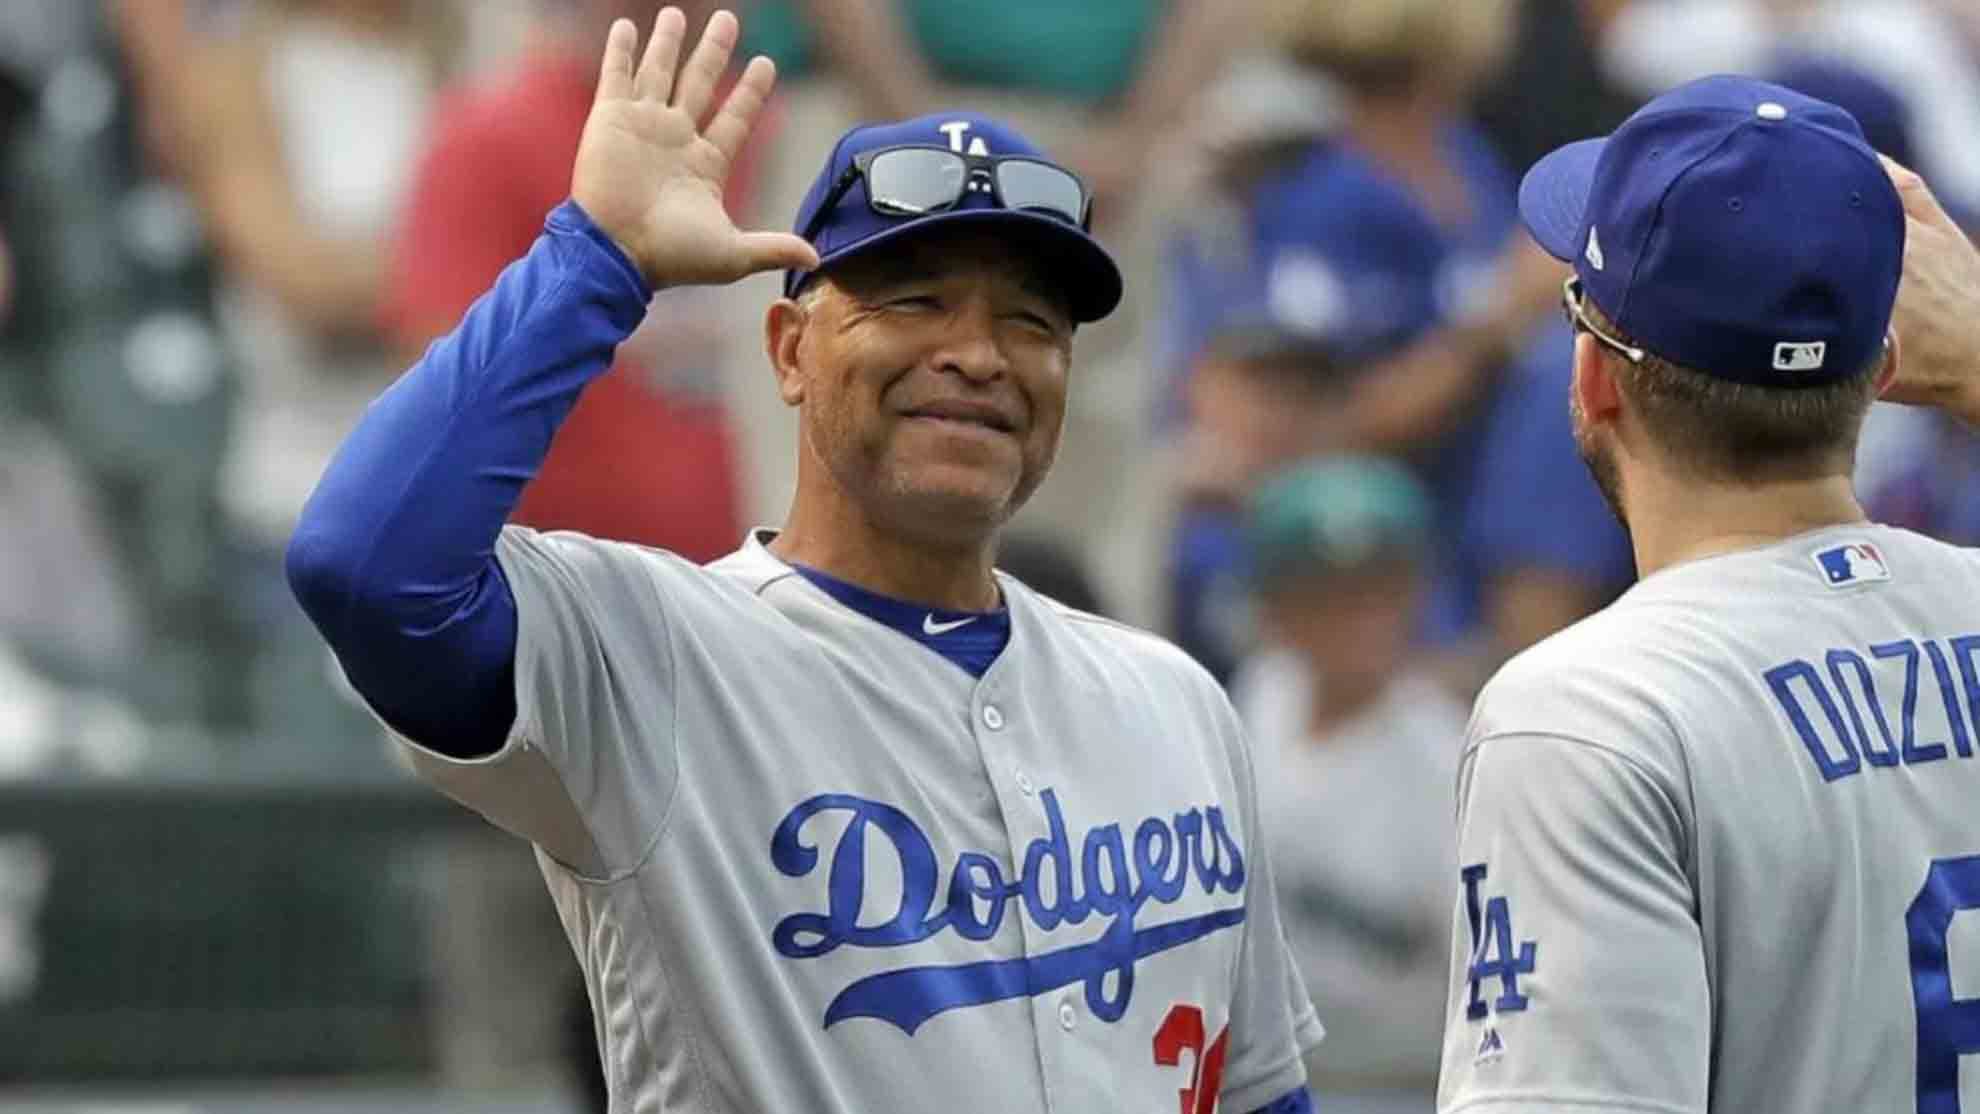 Dodgers News: Dave Roberts Expects LA to Win the World Series in